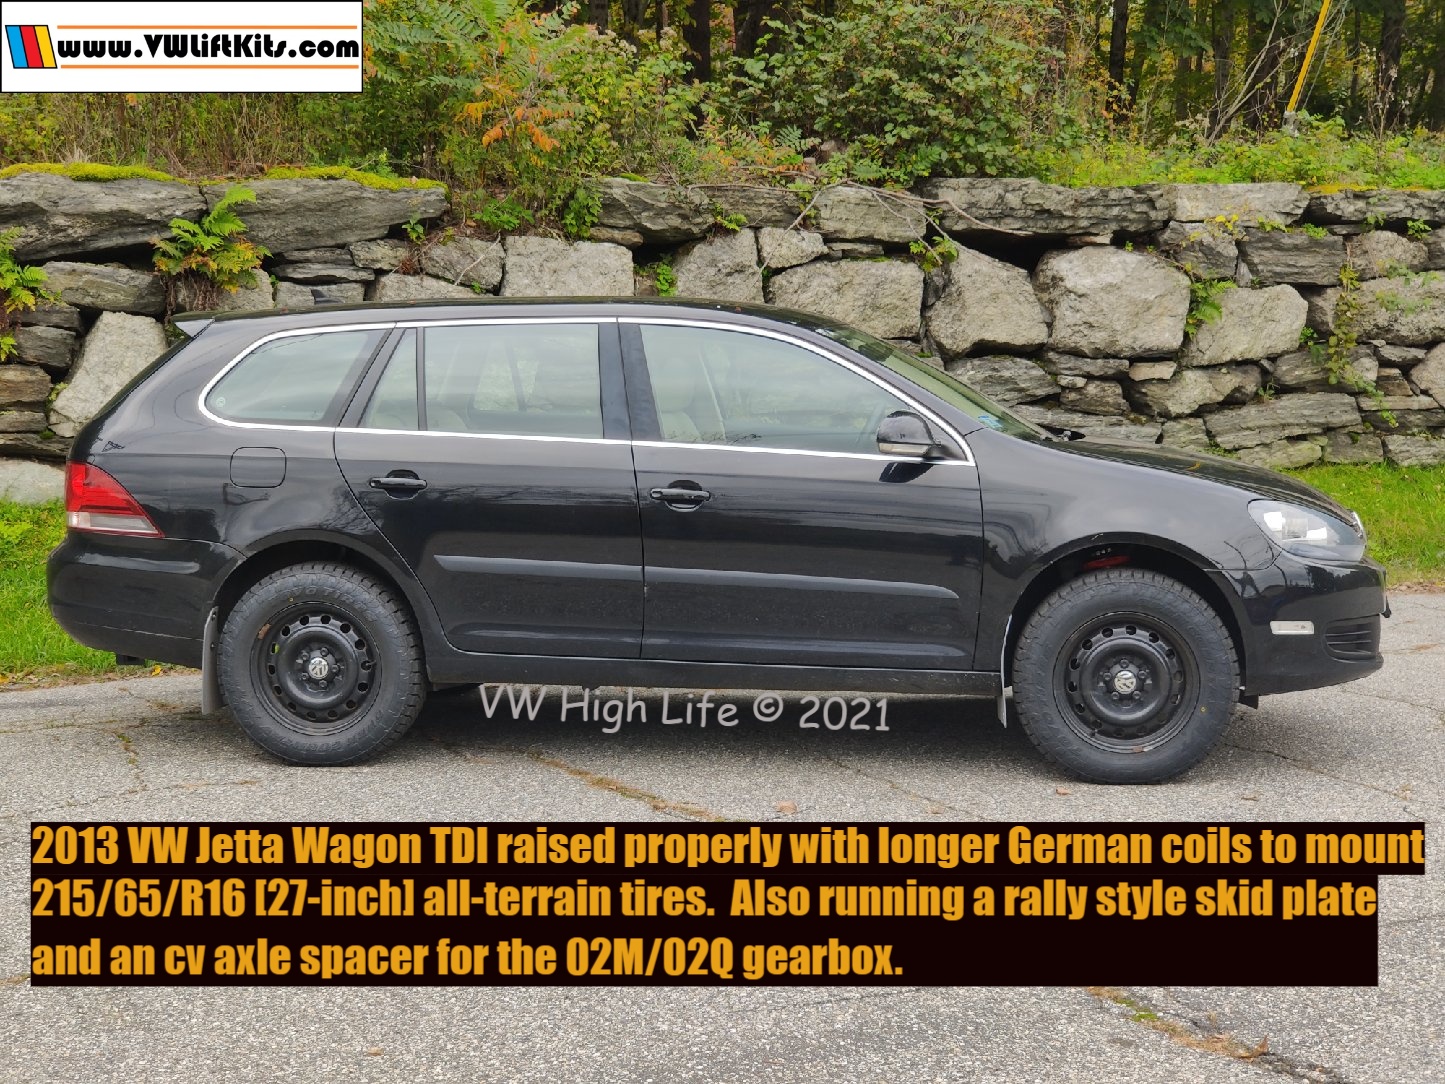 This 2013 Jetta Wagon is lifted using longer coils and shocks, an axle spacer to run 27-inch tires.